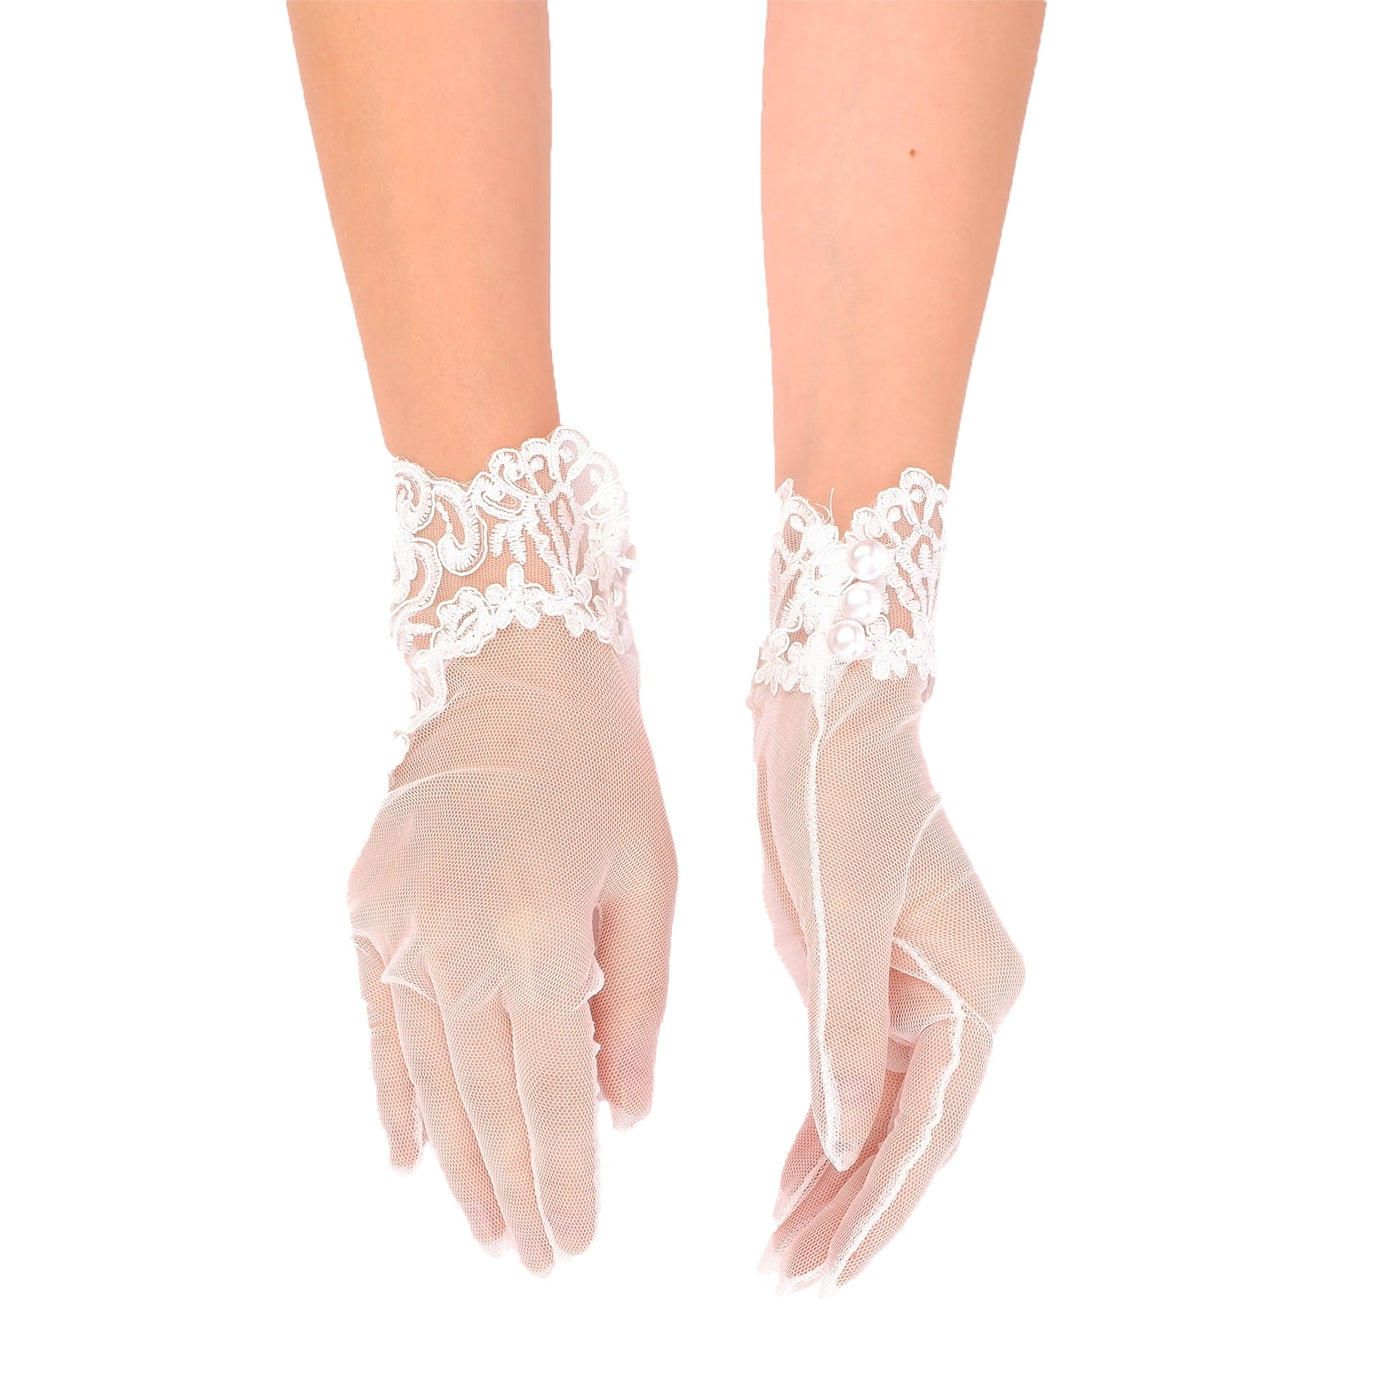 Lace Embroidered Buttoned Bridal Wedding Gloves Tulle Bridal Gloves Henna Night Tulle Gloves Black